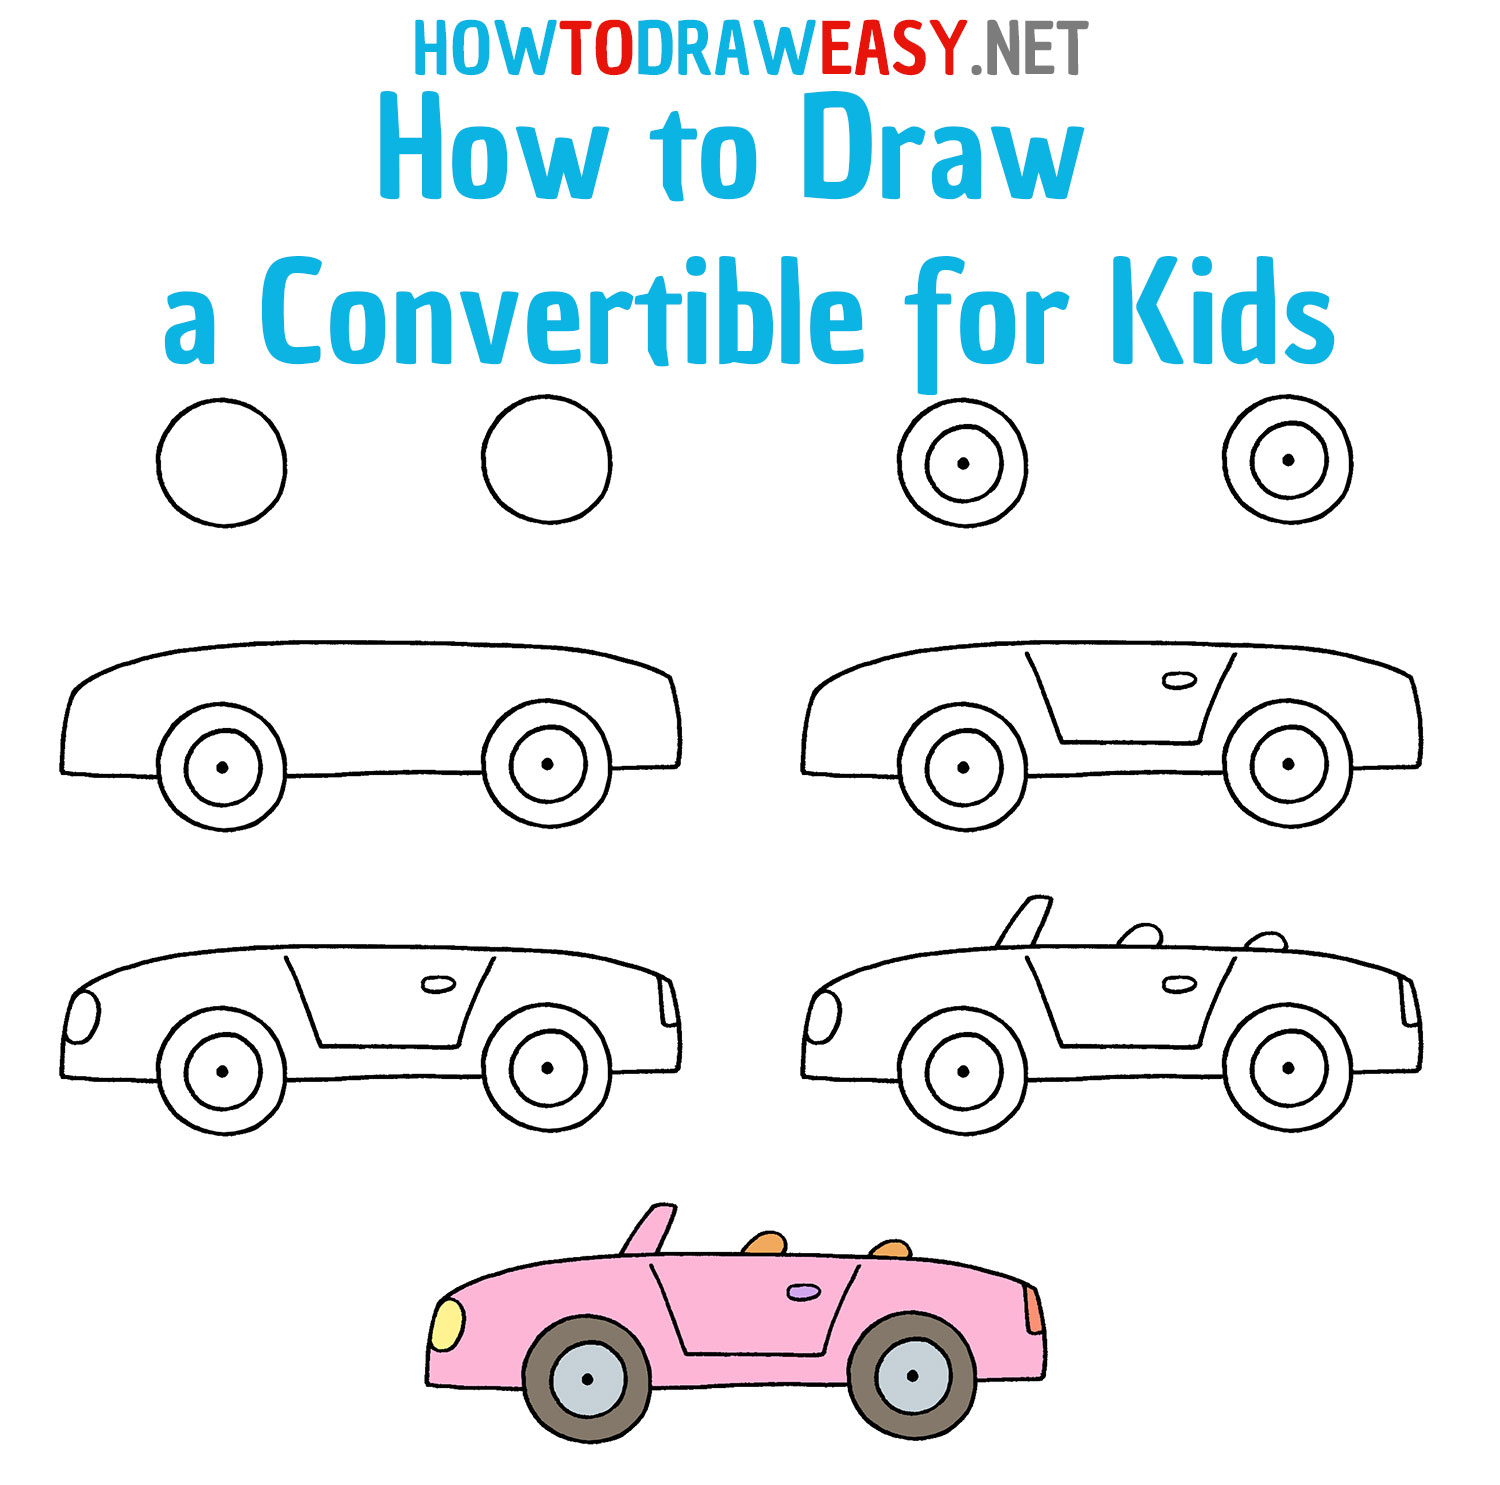 How to Draw a Convertible Car Step by Step